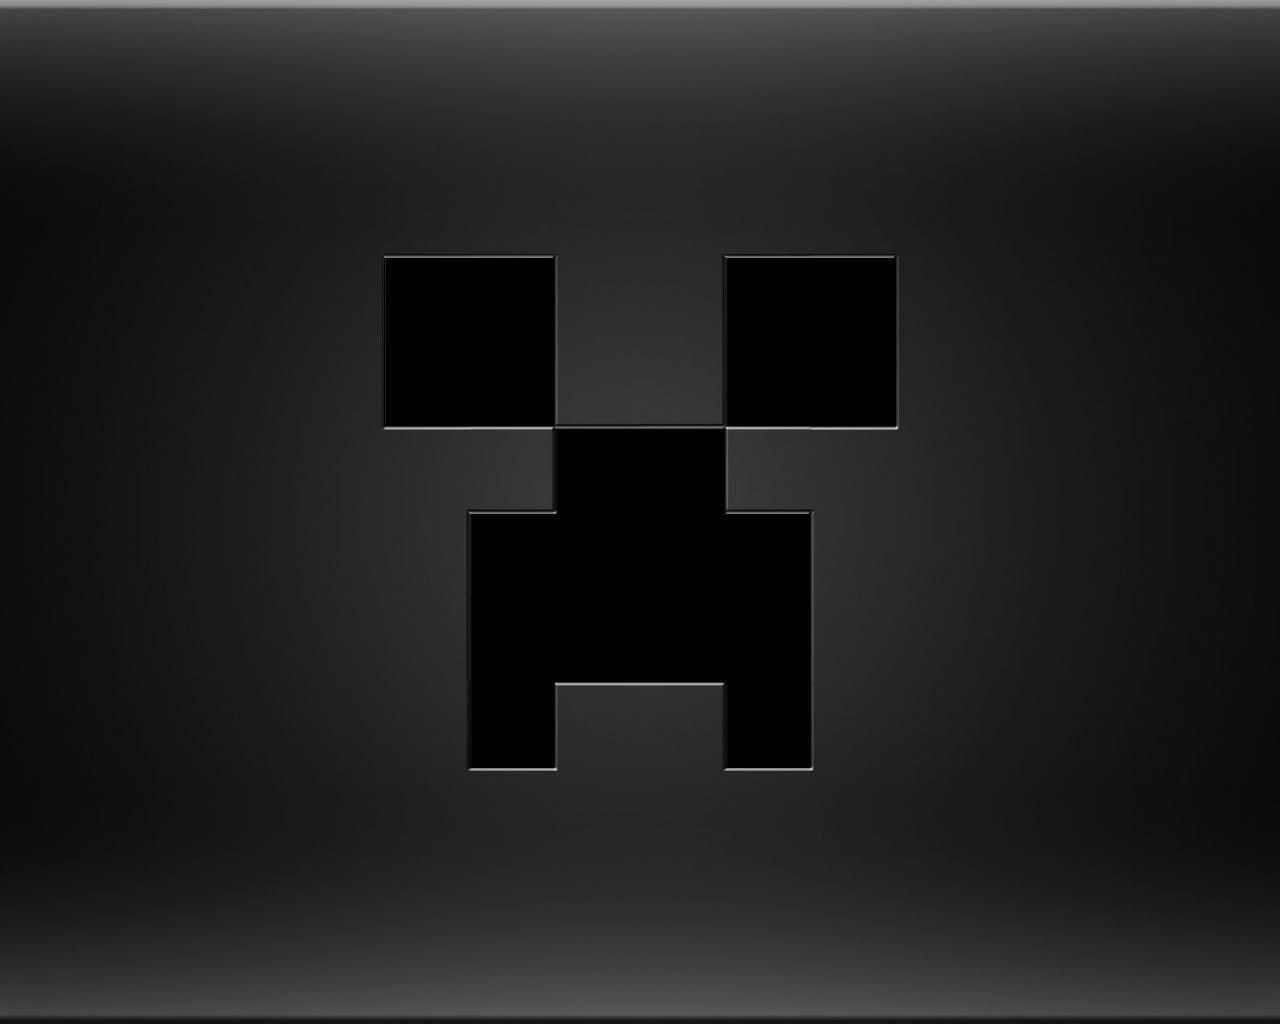 Minecraft wallpaper 1920x1080 - (#41189) - High Quality and ...